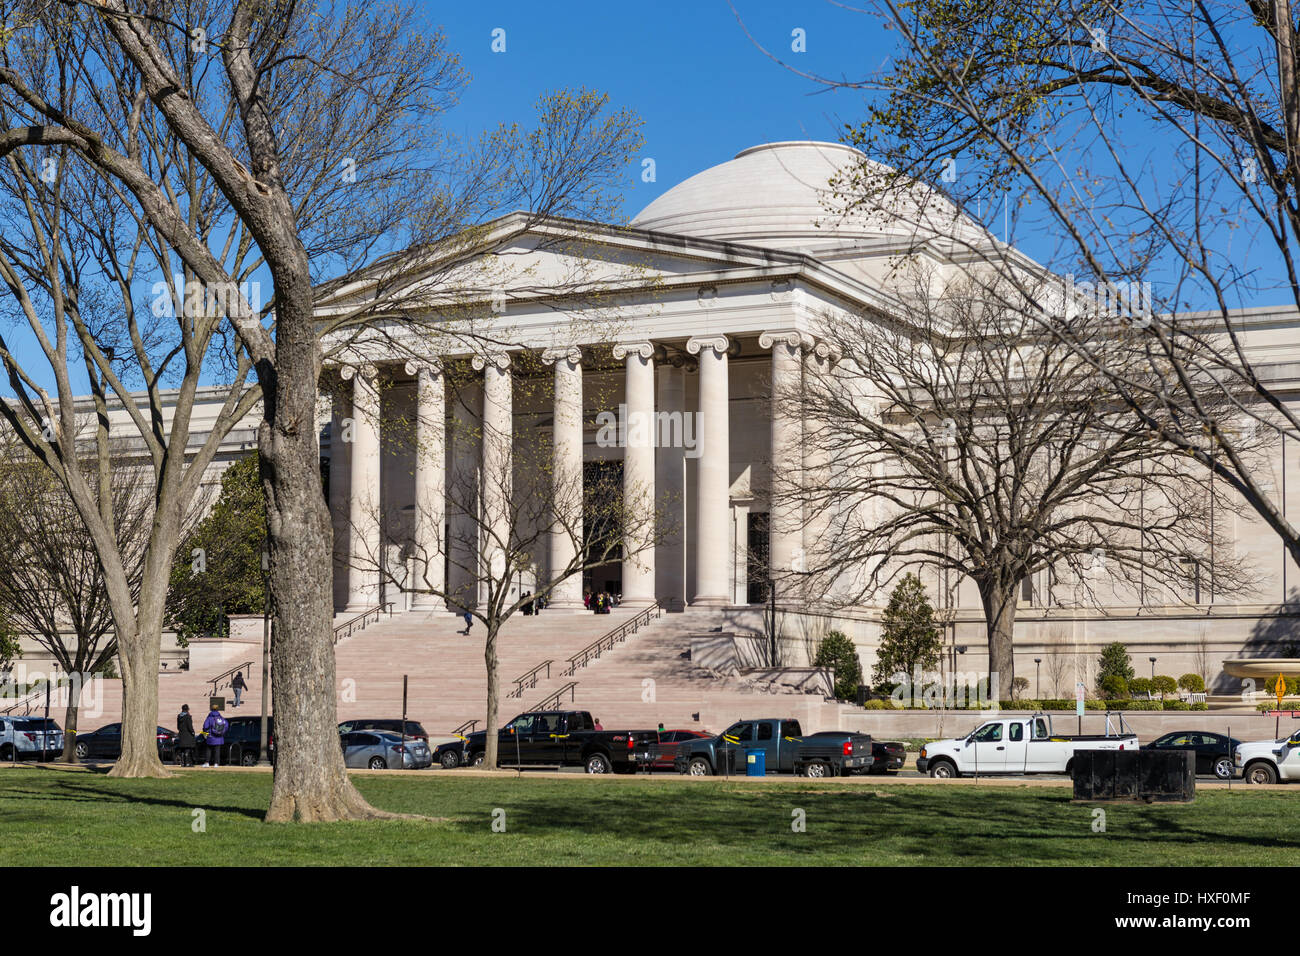 A view of the Neo-classical west building of the National Gallery of Art on the National Mall in Washington, DC. Stock Photo